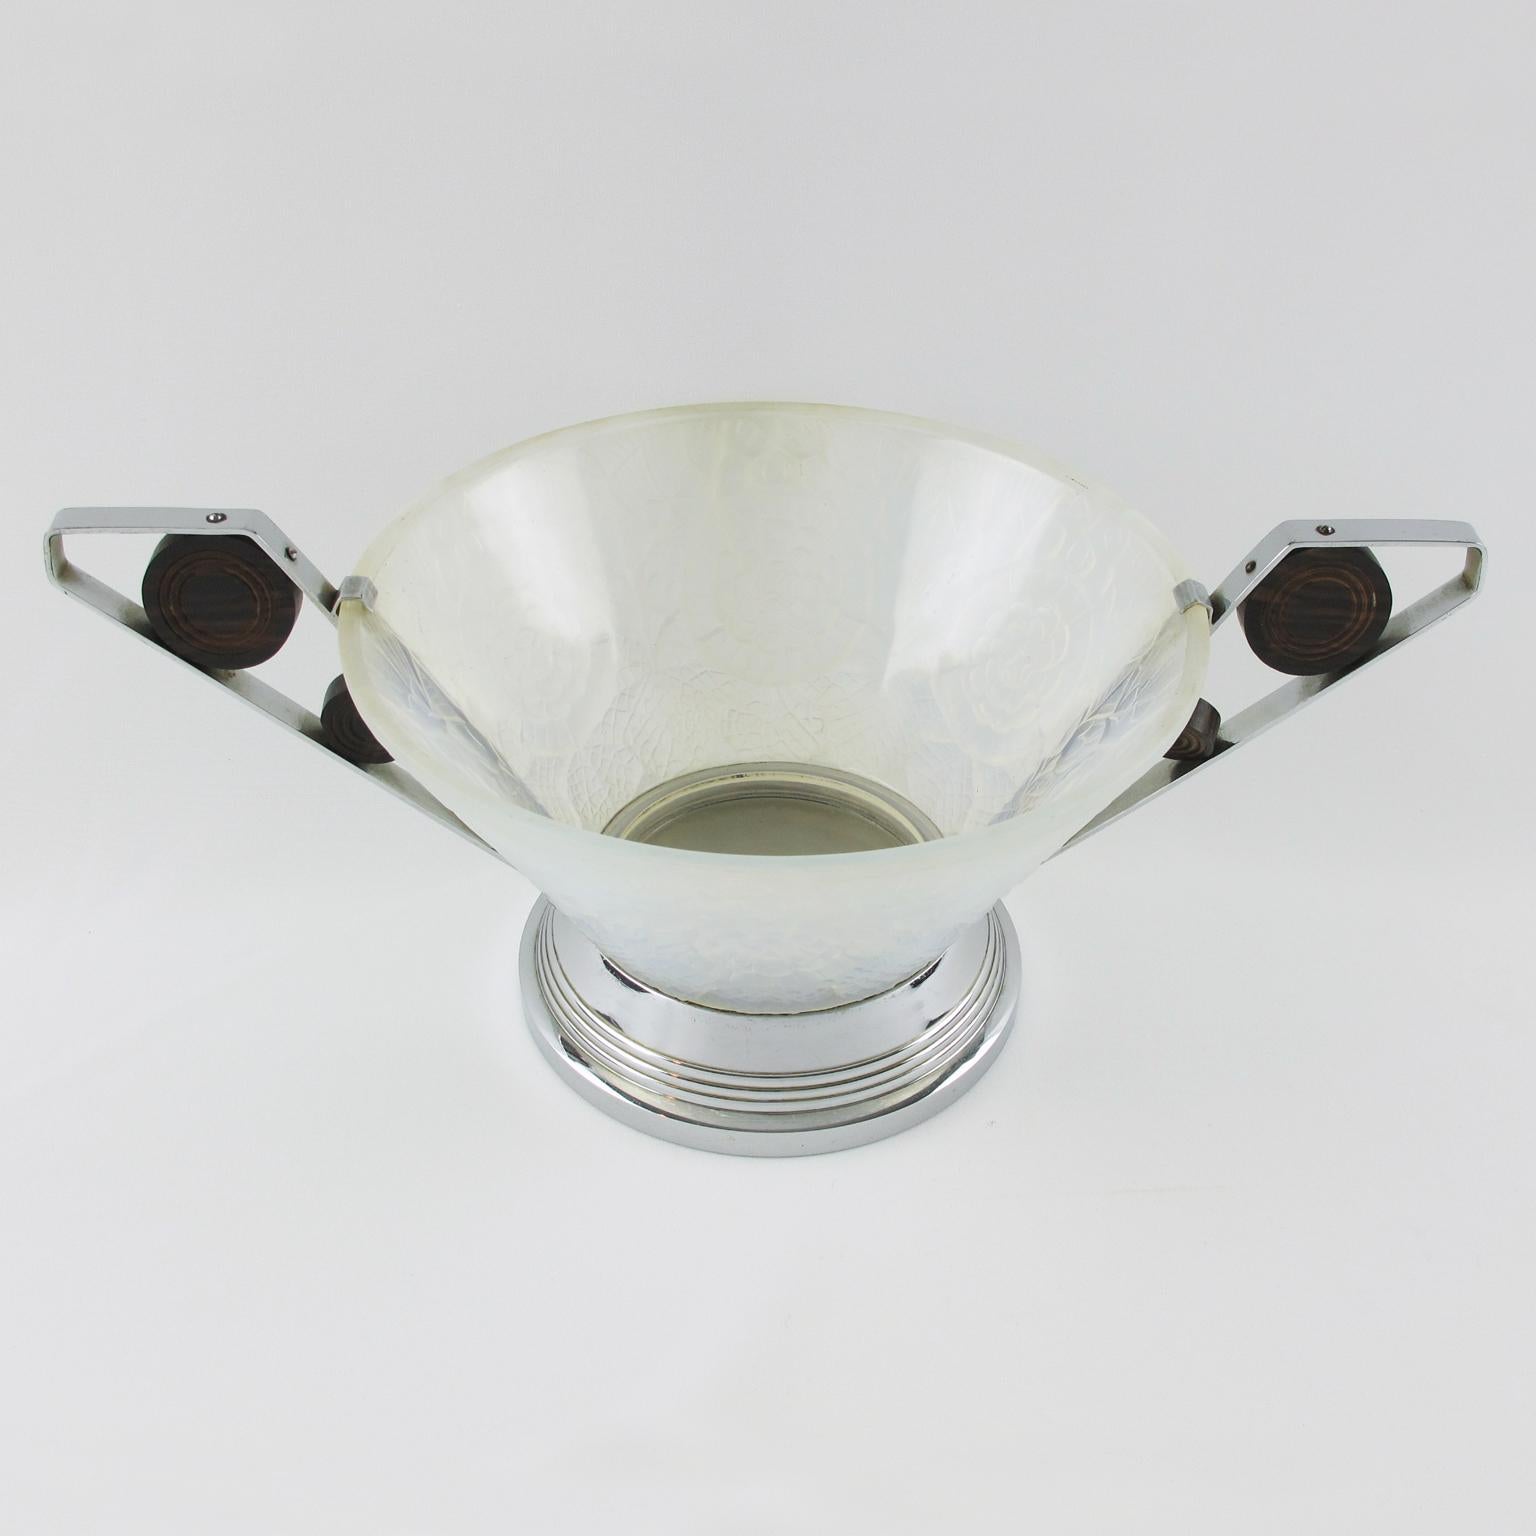 This elegant French Art Deco centerpiece decorative bowl was manufactured by crystal factory Choisy-le-Roi, France, and designed by Pierre D'Avesn. The geometric shape boasts chromed metal handles ornated with Macassar wood accents. The rounded